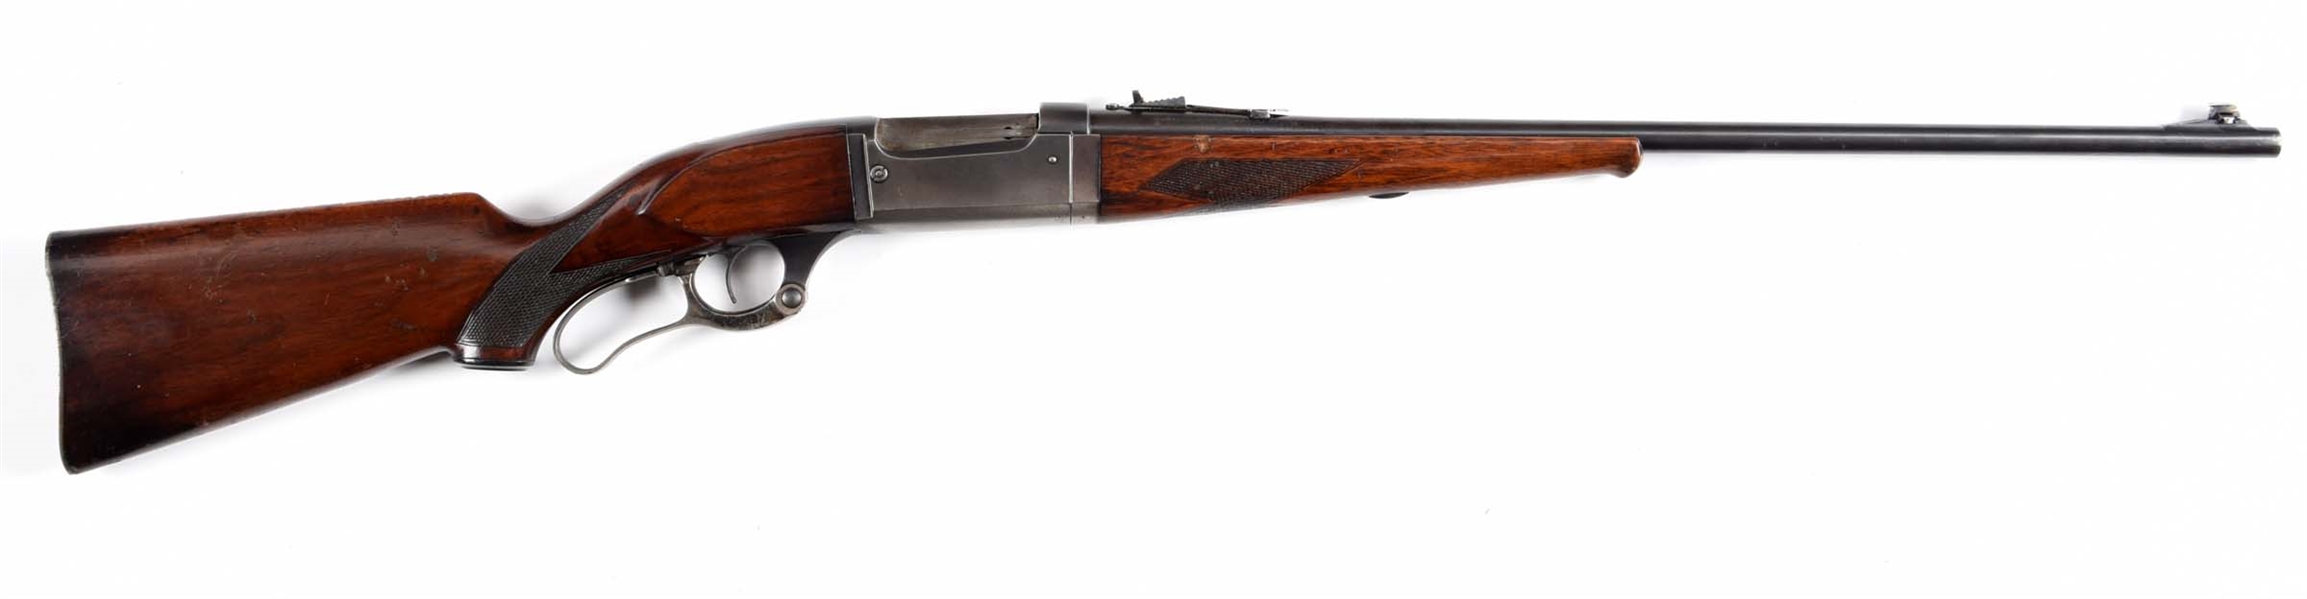 (C) SAVAGE MODEL 99 TAKEDOWN LEVER ACTION RIFLE.